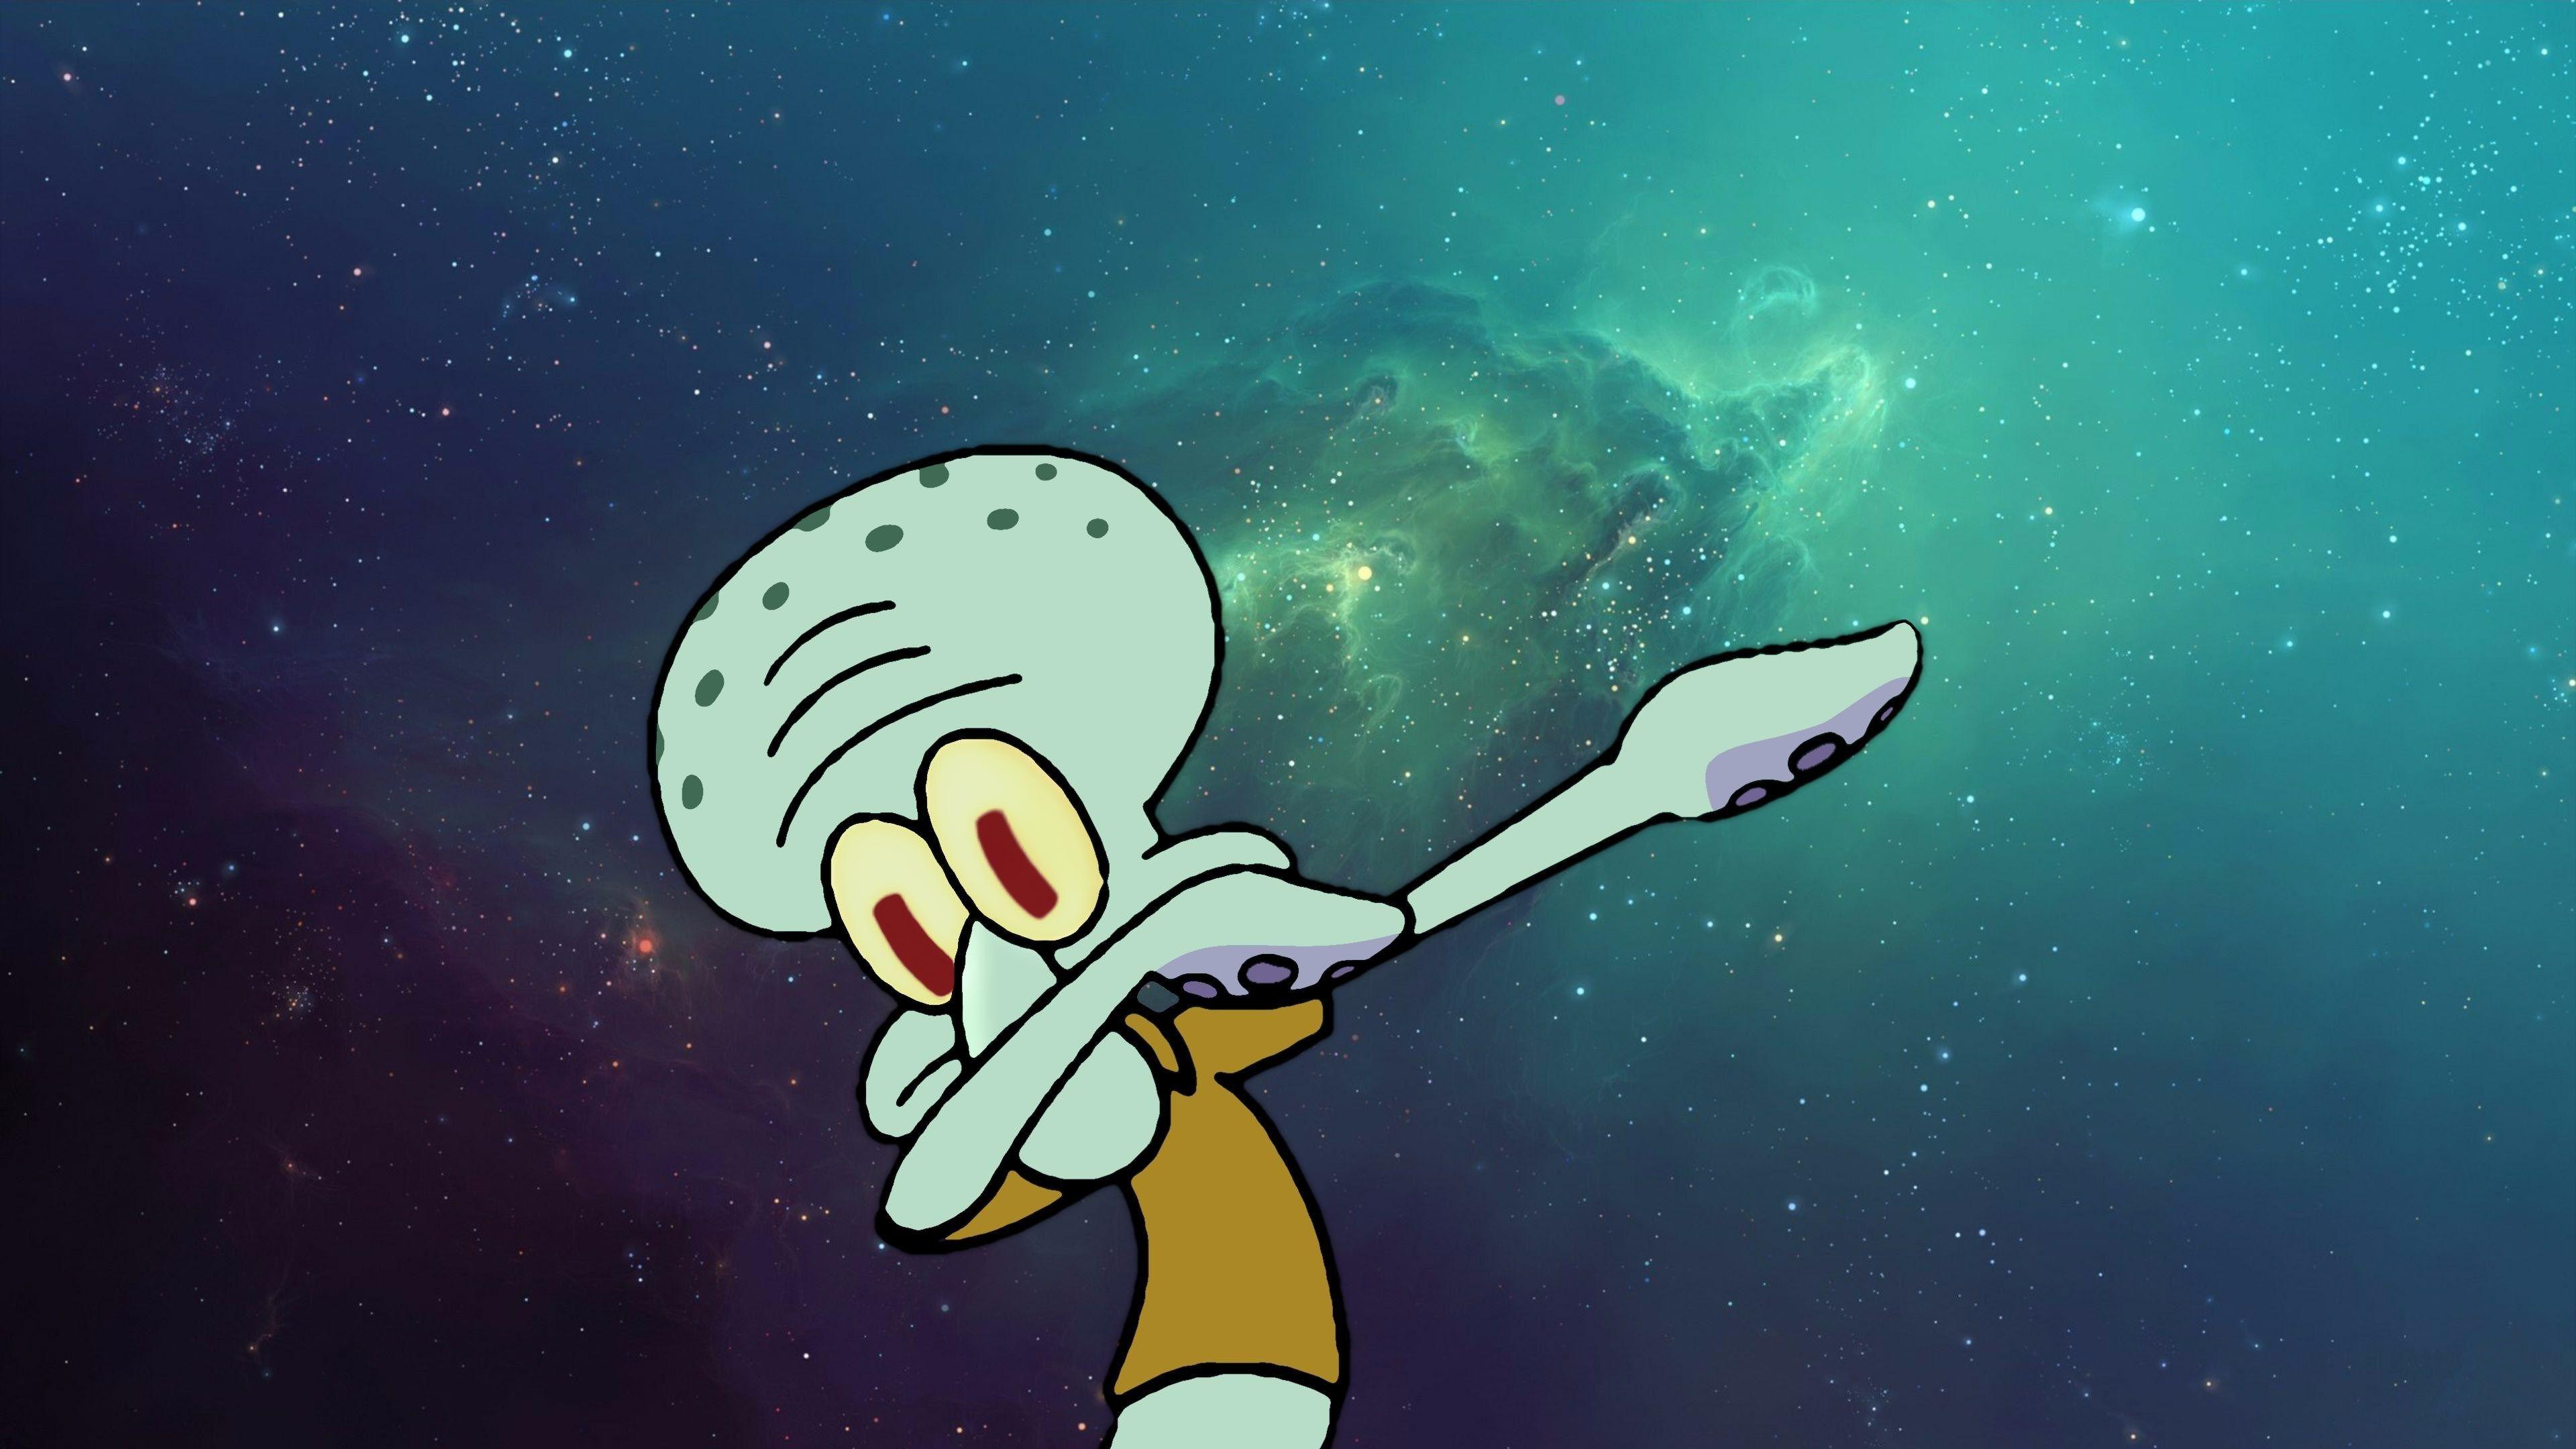 squidward dab wallpaper galleries and wallpapers on squidward dab wallpapers